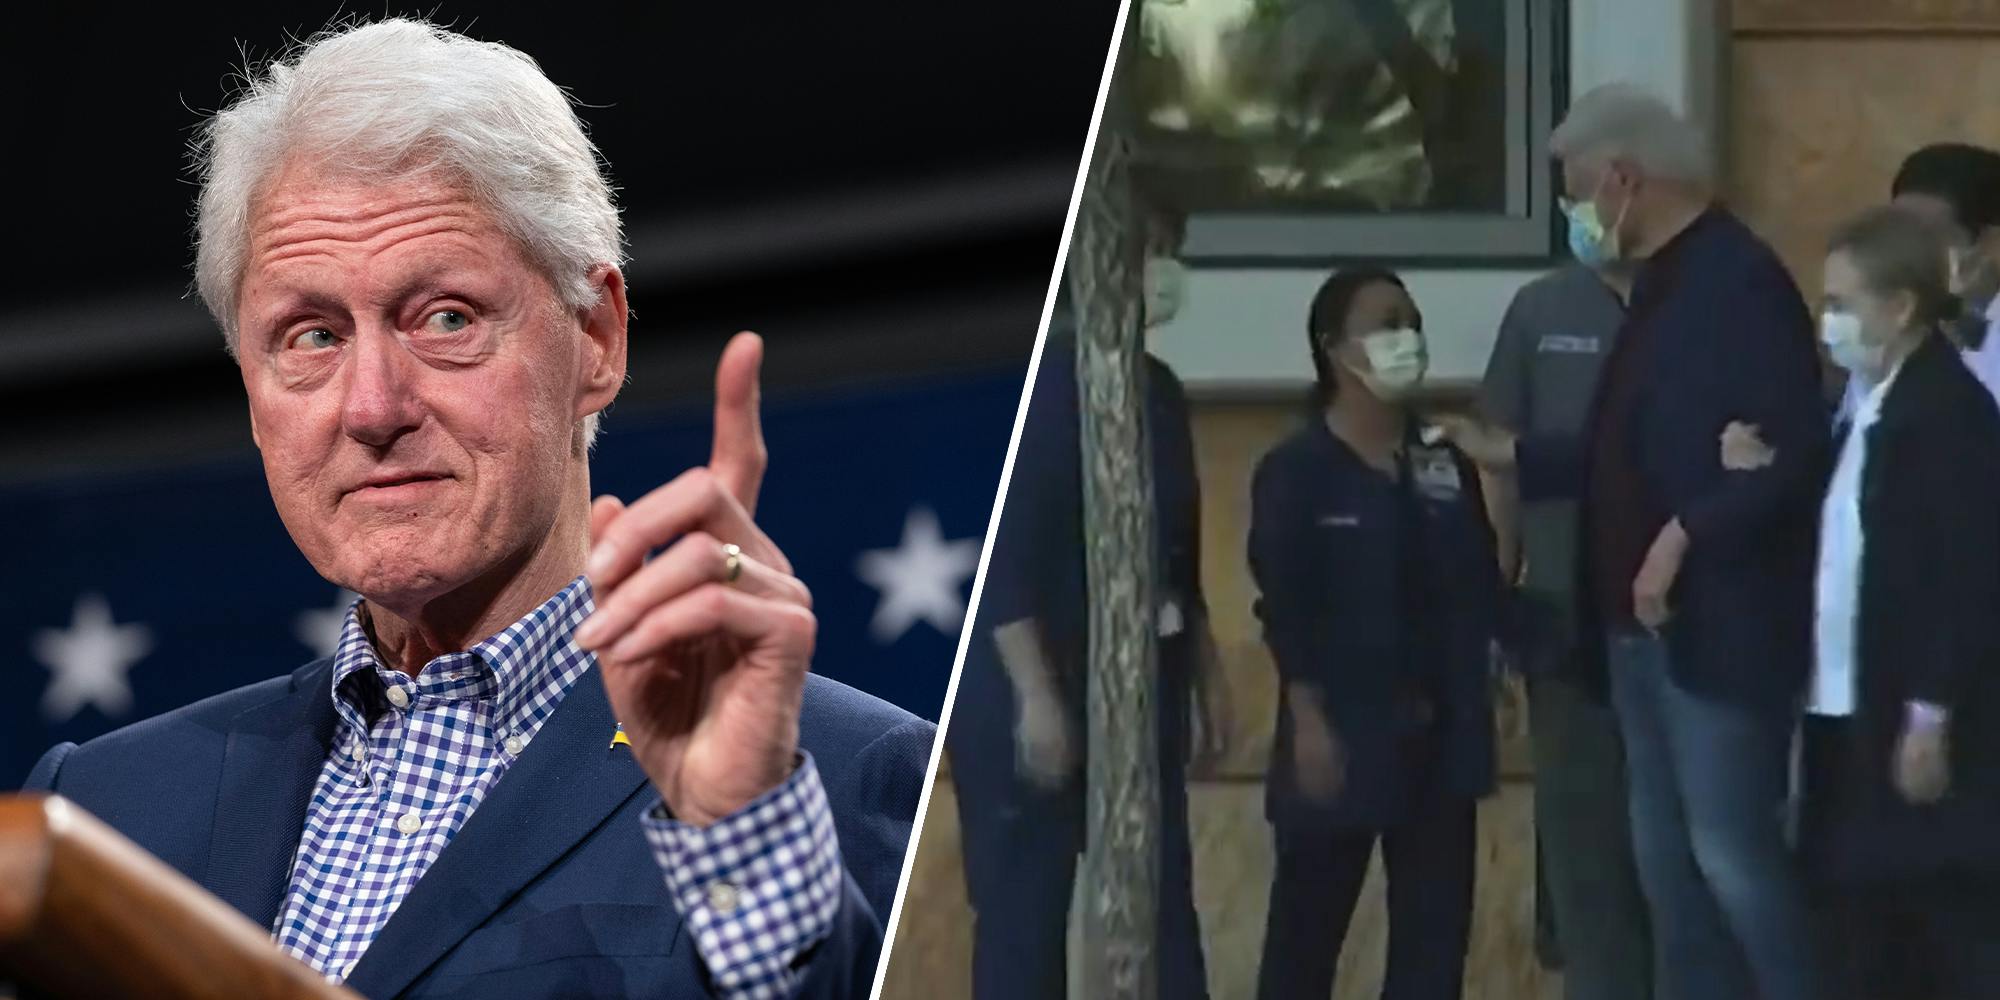 Conspiracy theorists think Bill Clinton visited the hospital to distract from Epstein docs